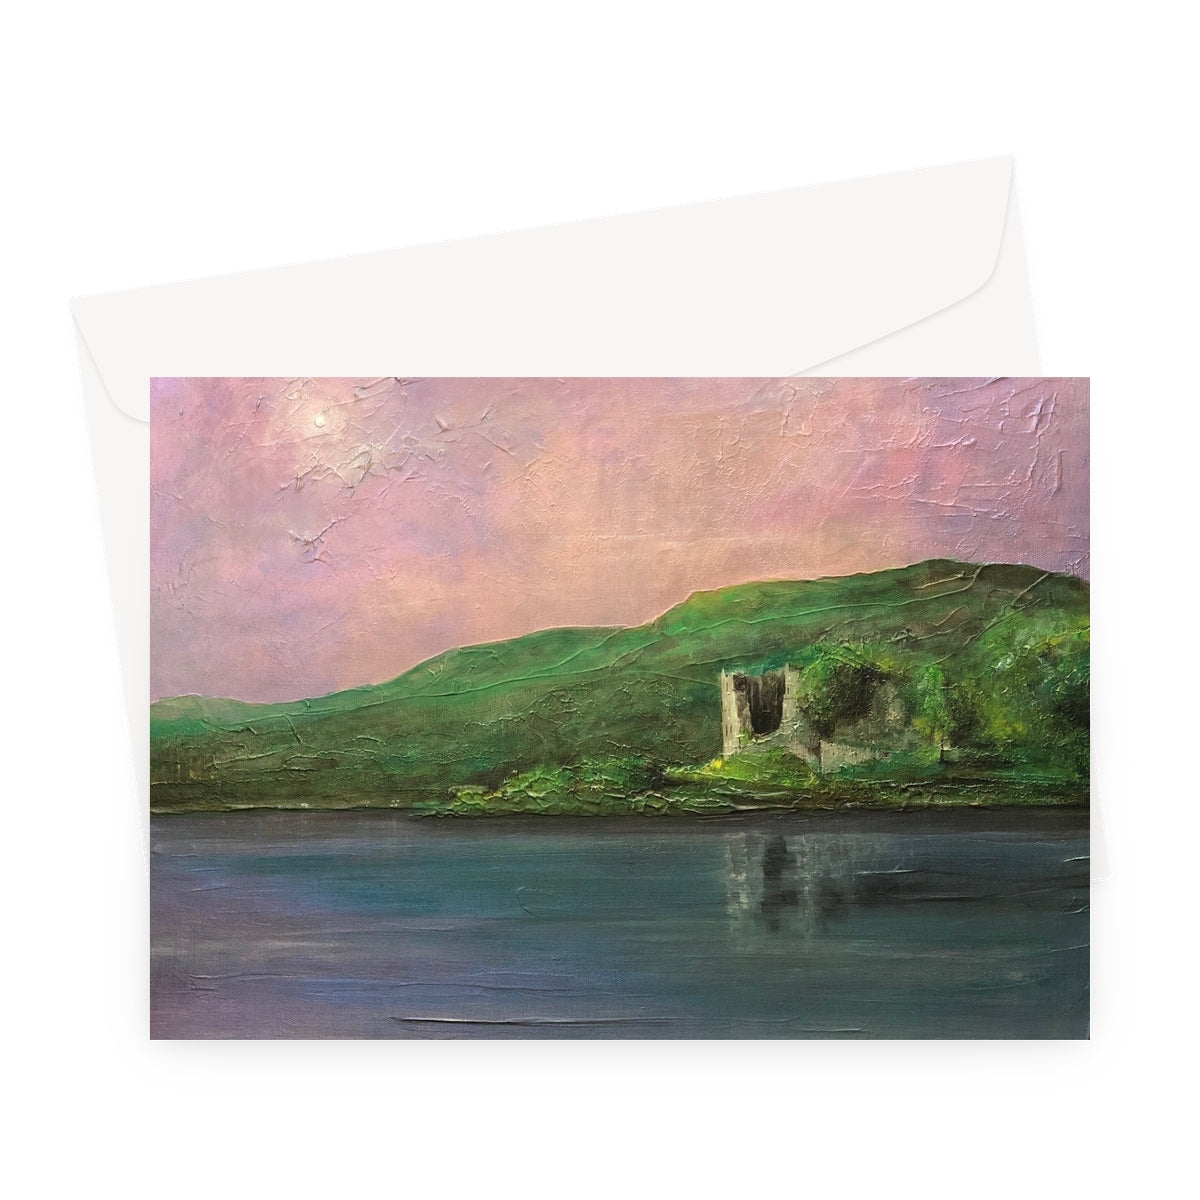 Old Castle Lachlan Art Gifts Greeting Card-Greetings Cards-Historic & Iconic Scotland Art Gallery-A5 Landscape-10 Cards-Paintings, Prints, Homeware, Art Gifts From Scotland By Scottish Artist Kevin Hunter